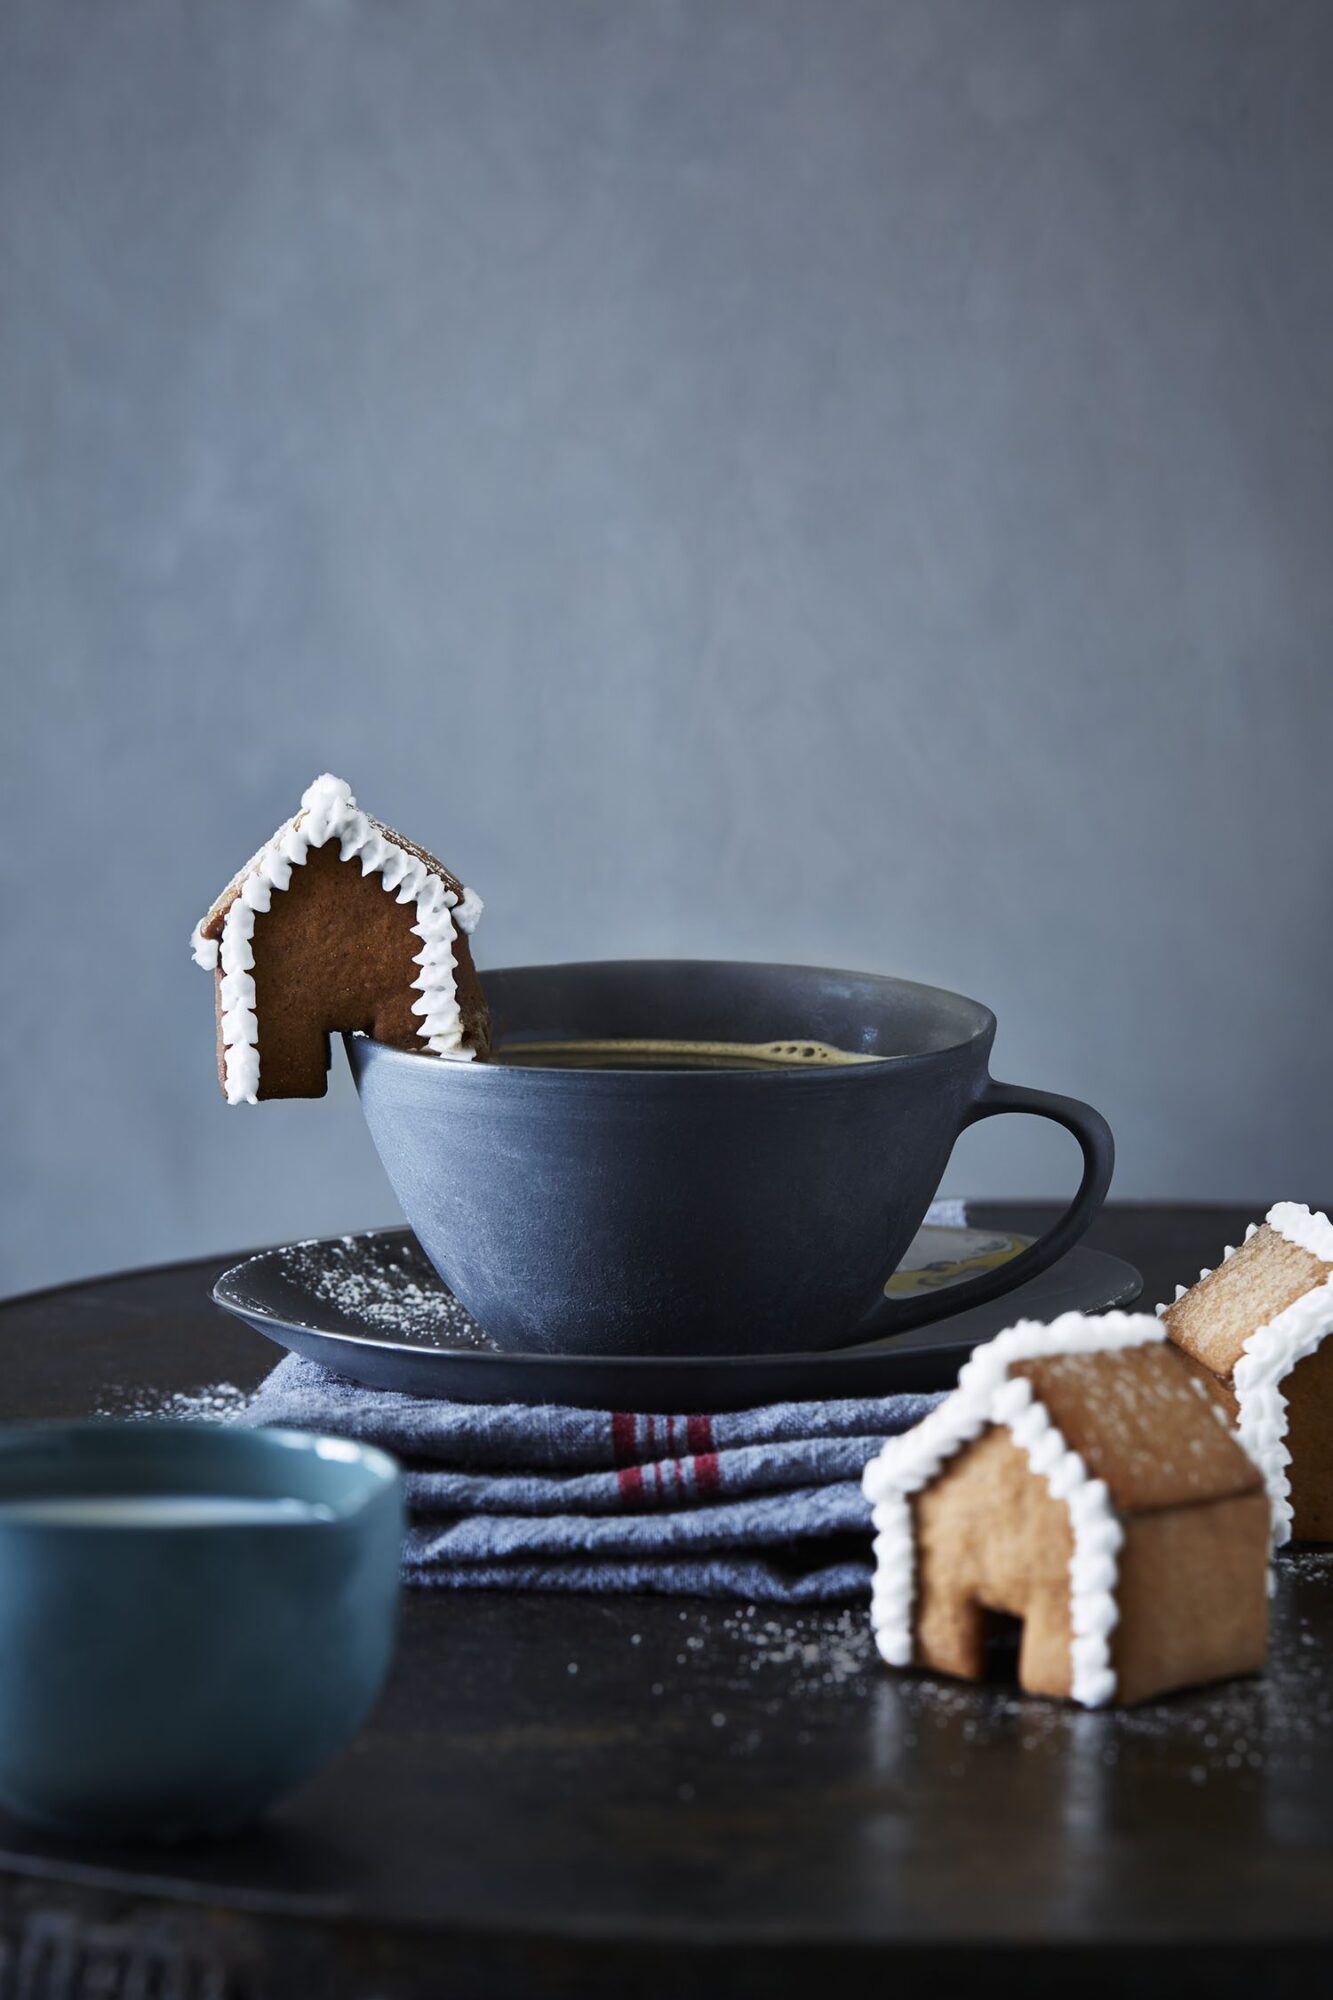 Gingerbread or Mini Gingerbread Houses